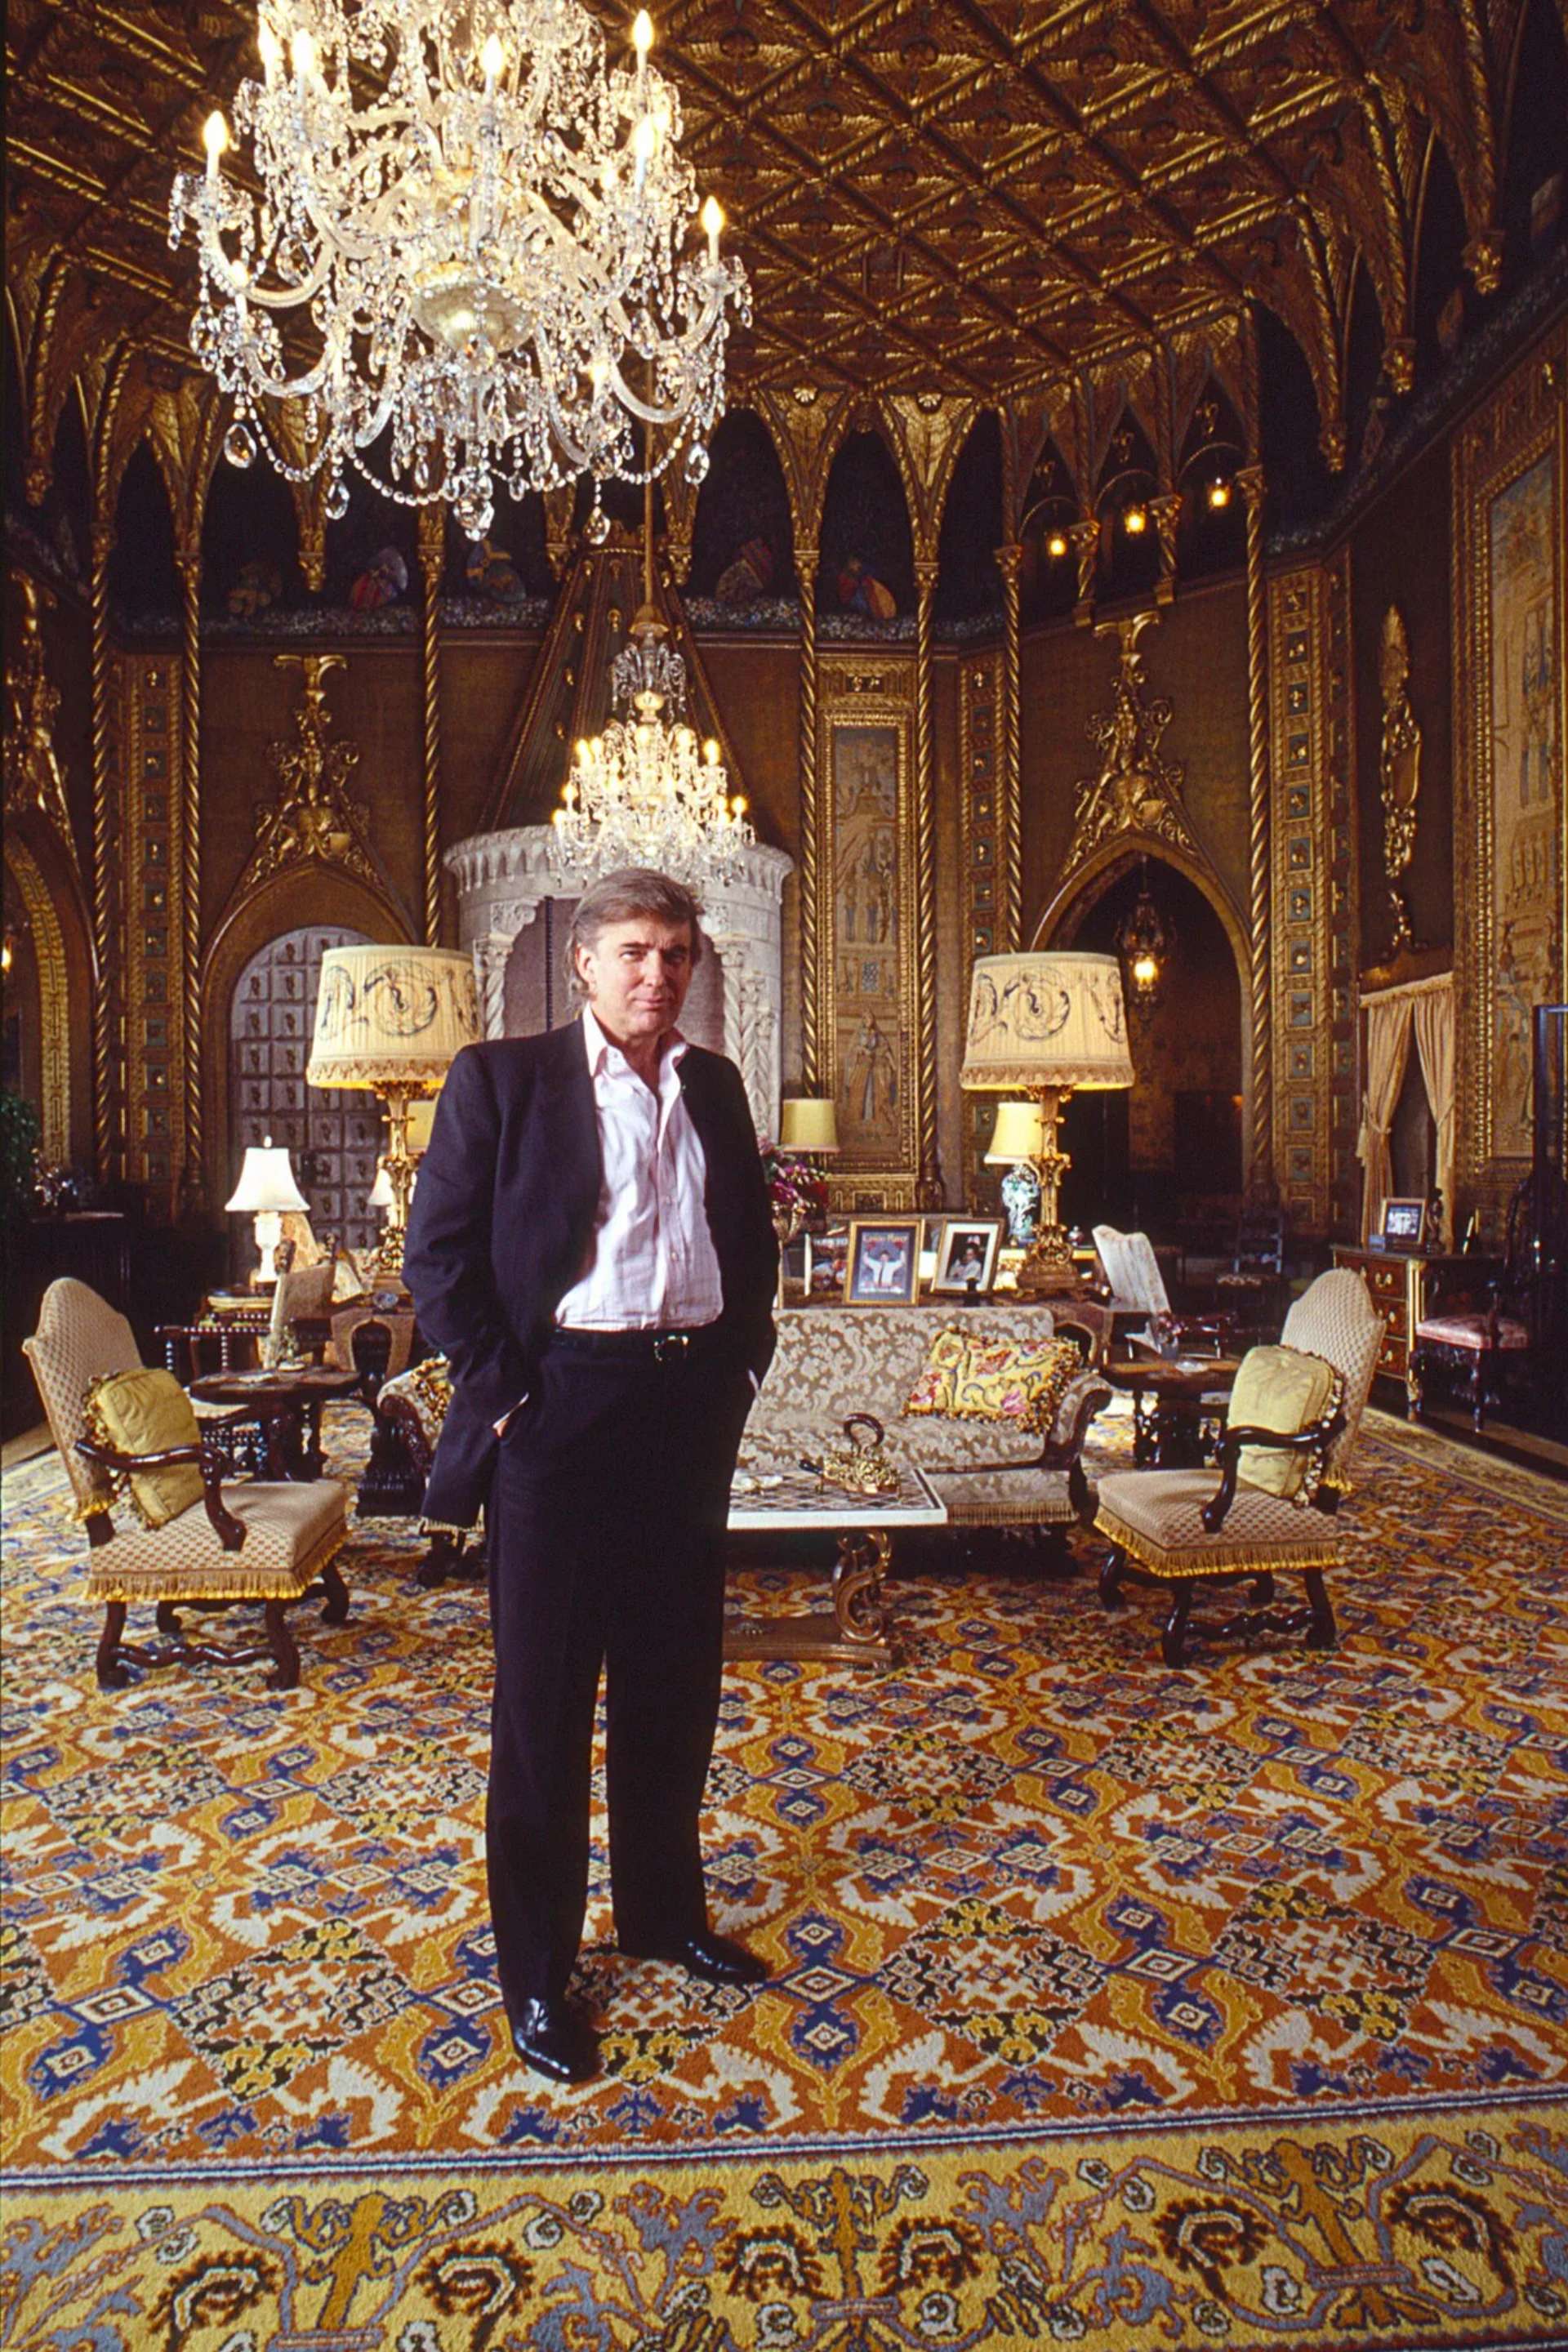 Former U.S. President Donald Trump standing in his golden living room at his residence Mar-A-Lago, Florida.